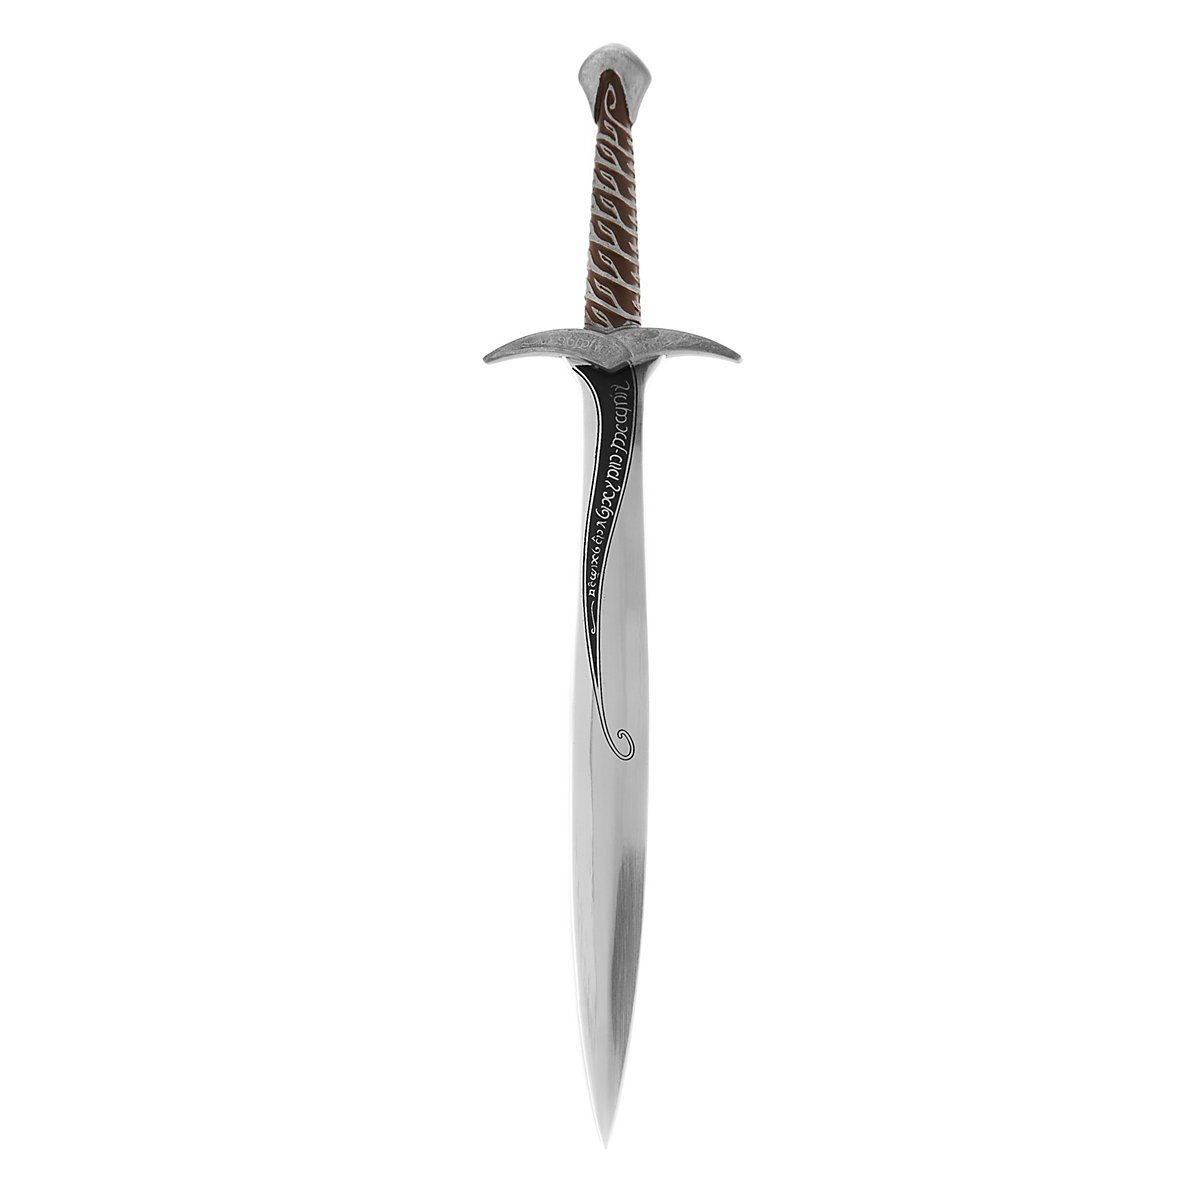 Lord of the Rings Sting Letter Opener